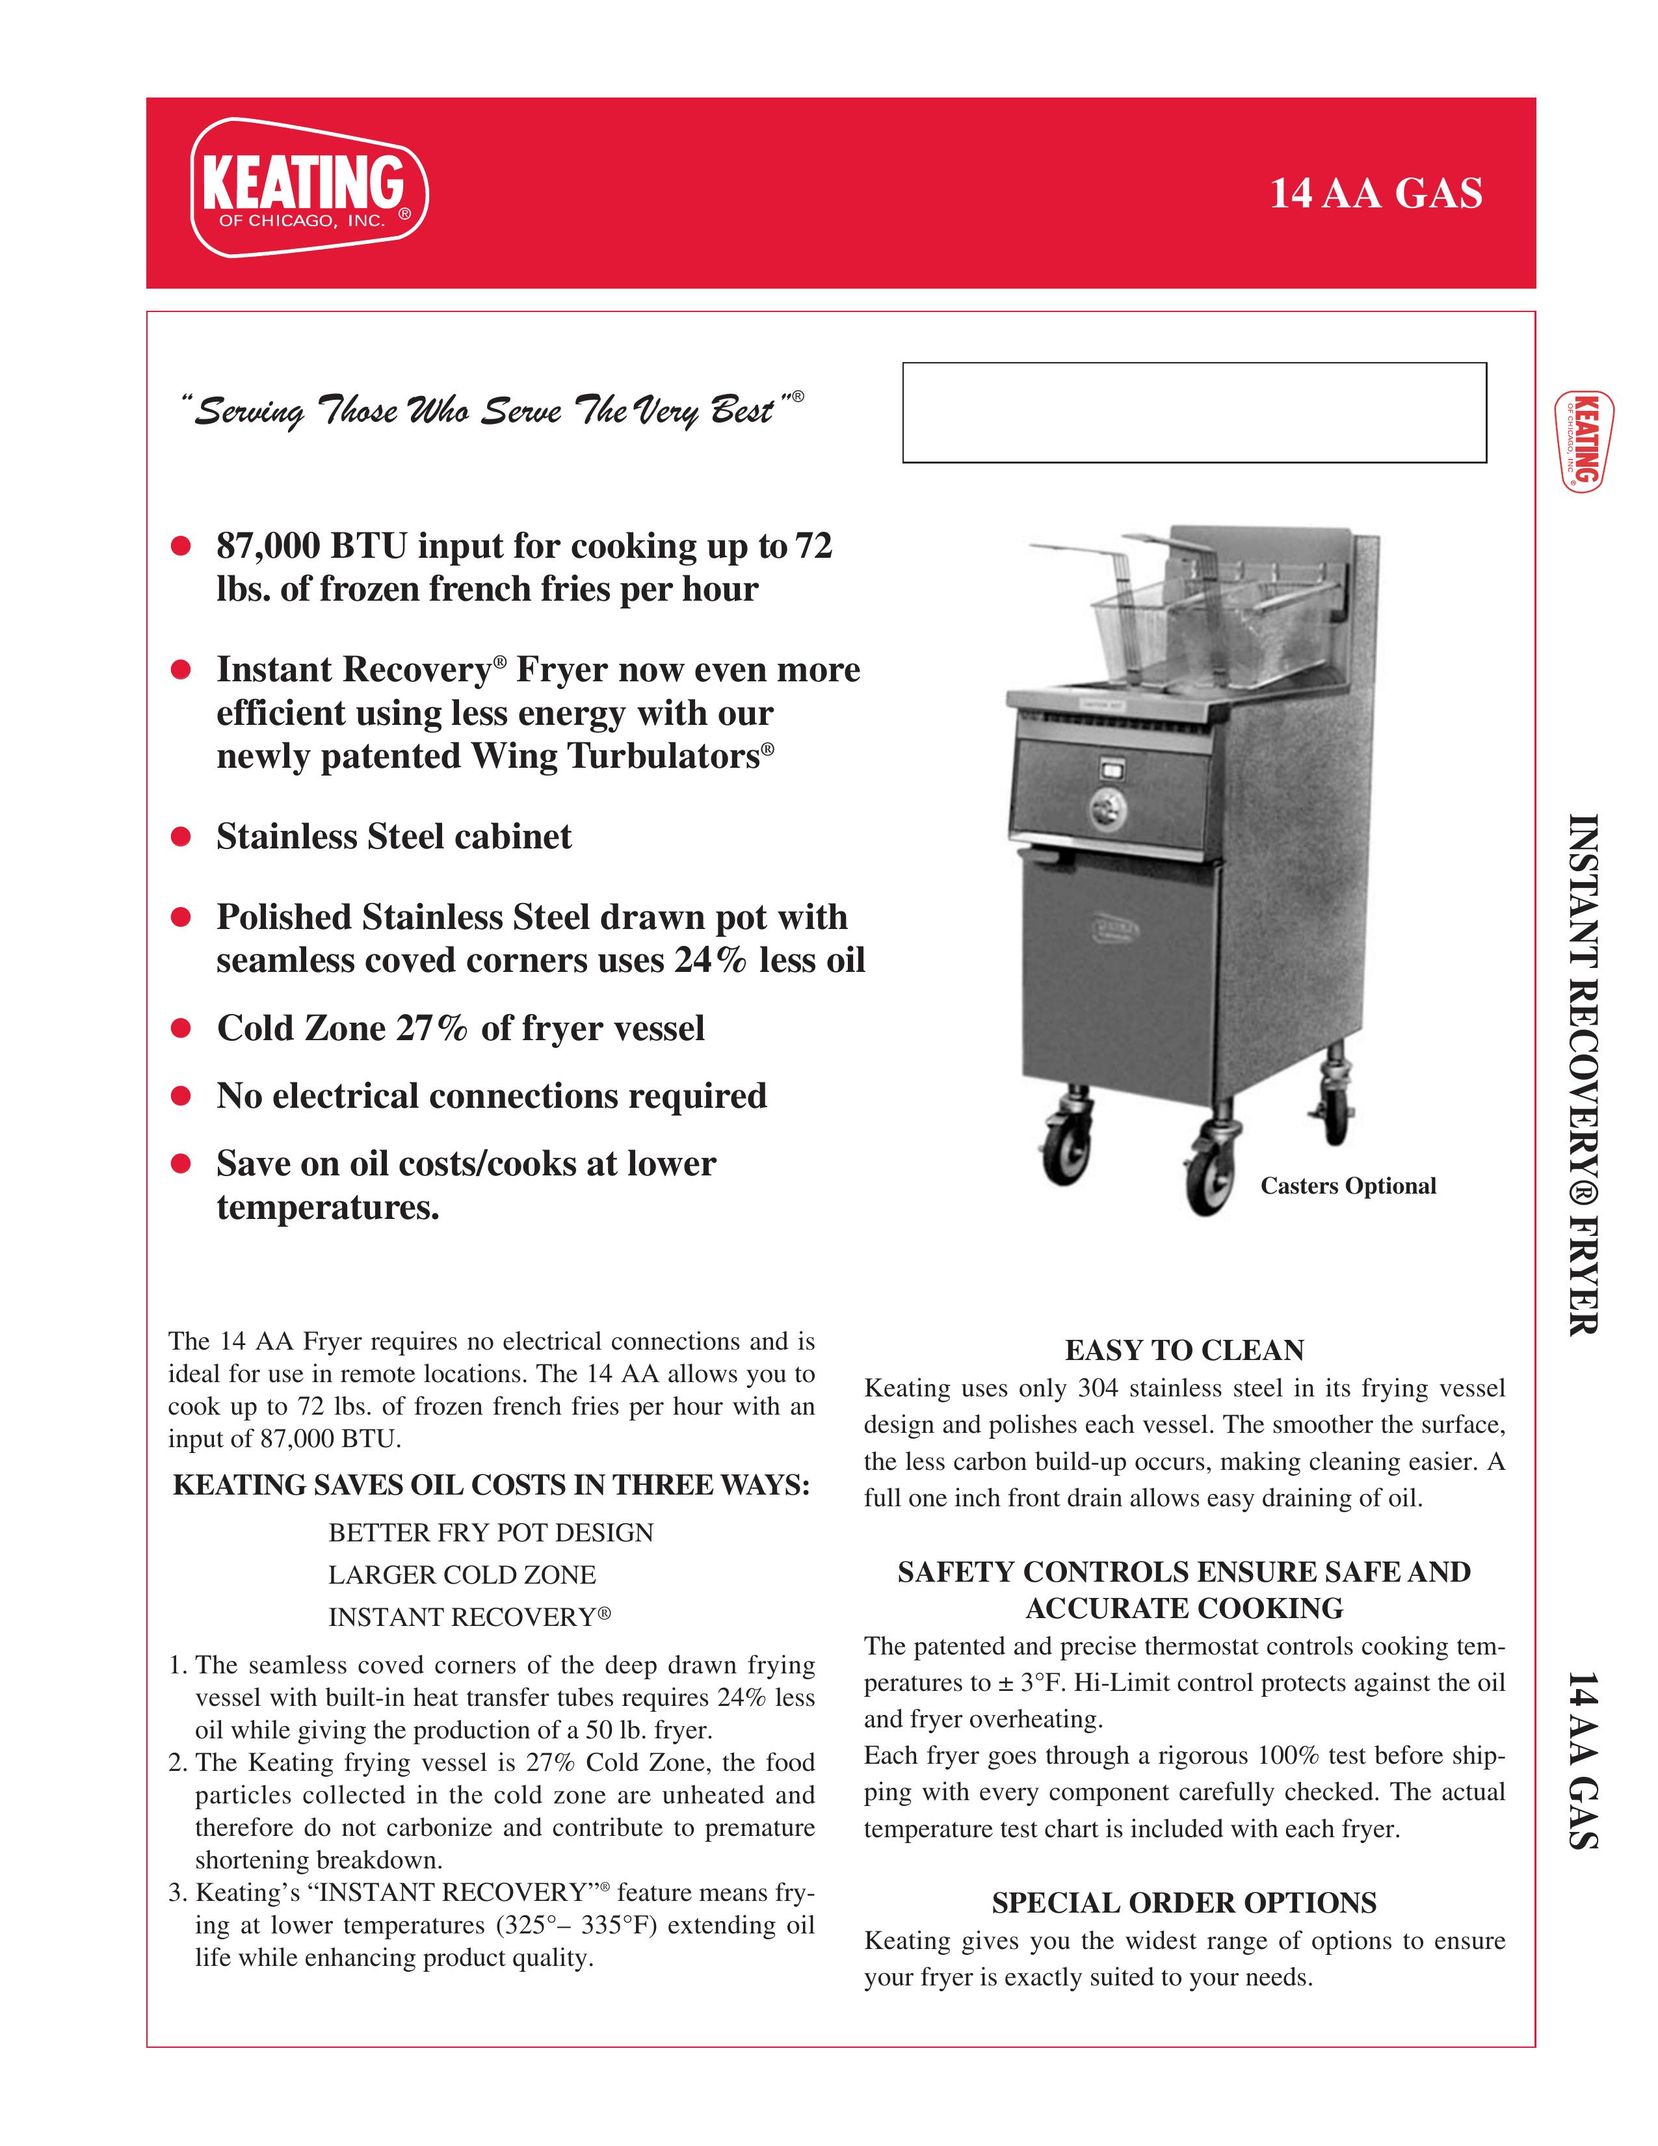 Keating Of Chicago 14 AA Gas Fryer User Manual